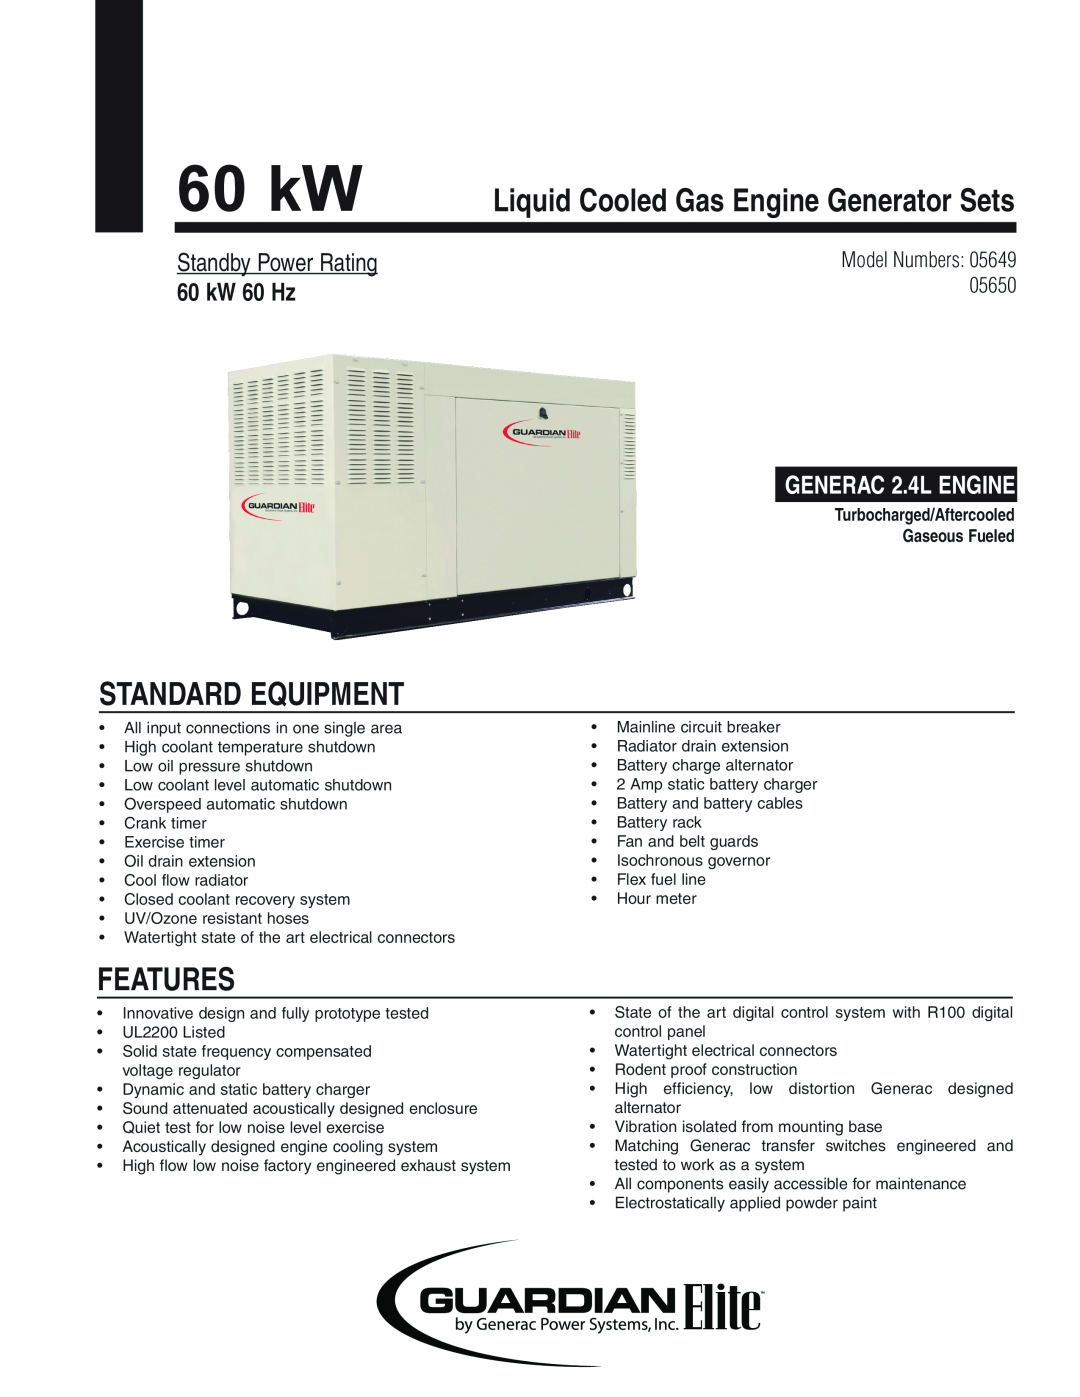 Guardian Technologies 05649 manual Standard Equipment, Features, Liquid Cooled Gas Engine Generator Sets, 60 kW 